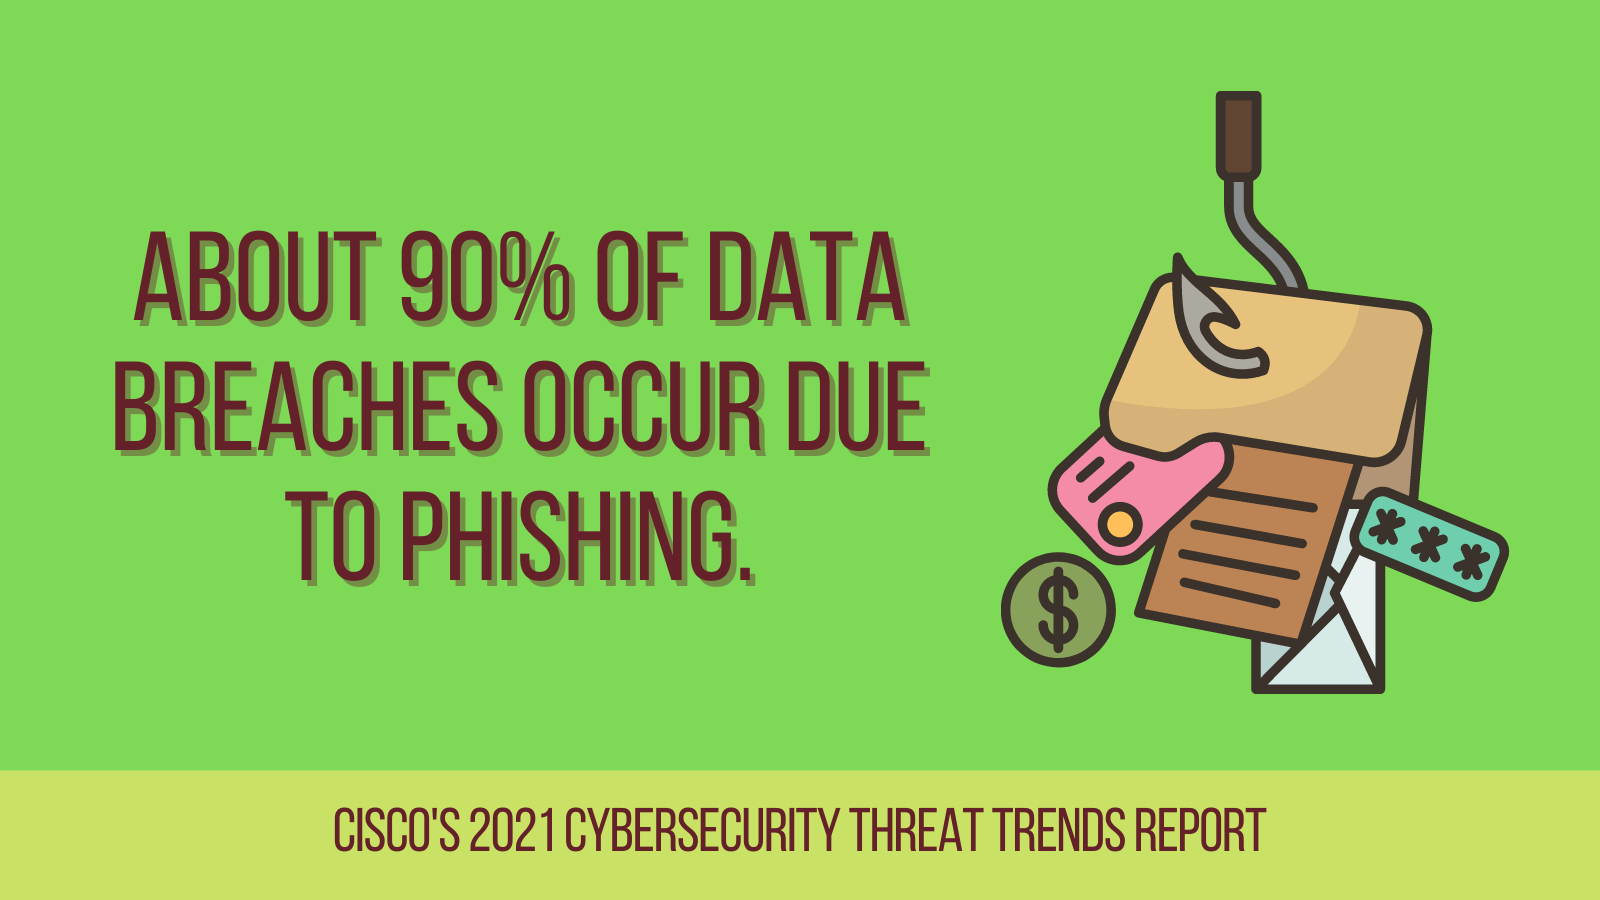 nulled plugins and themes can cause phishing 